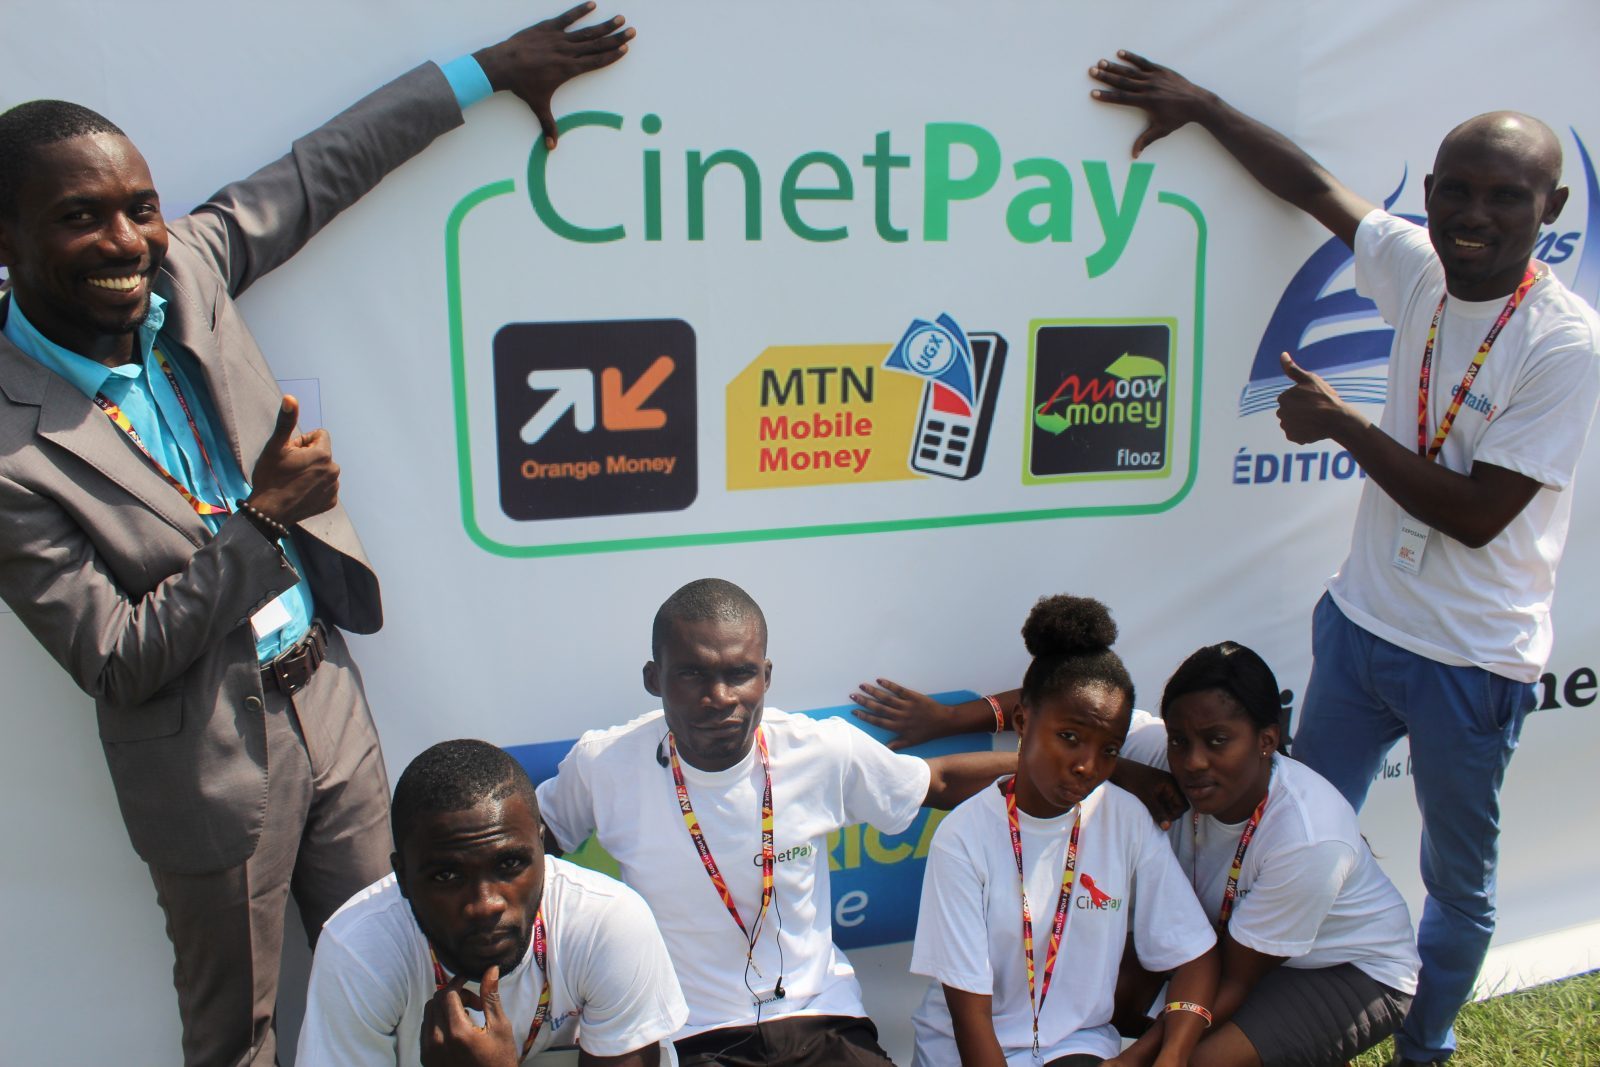 cinetpay: revolutionizing online payment in africa - afrikatech